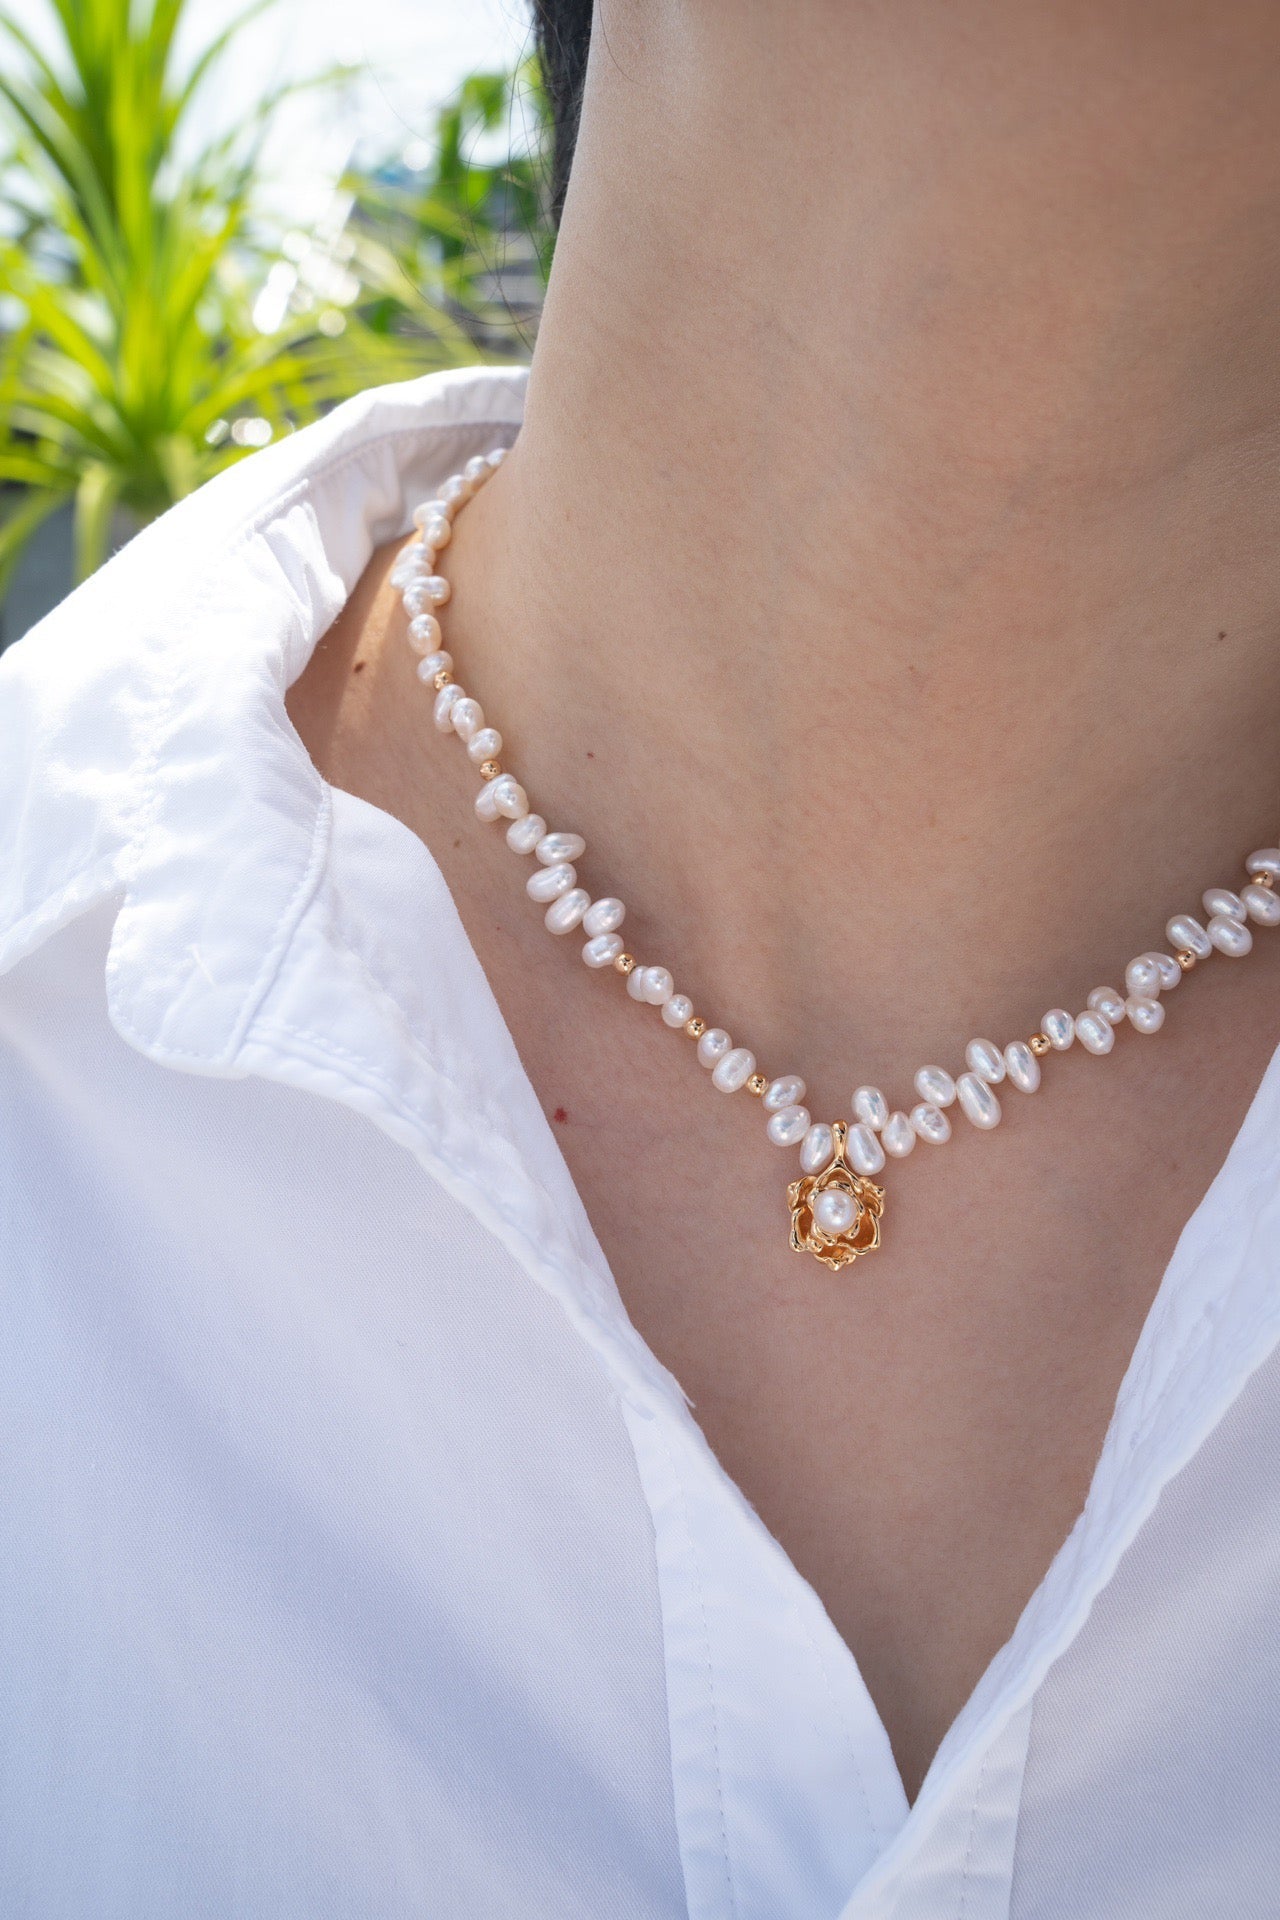 Meticulous and unique design and craftsmanship - Exquisite Camellia Pearl Necklace - Pearl Luminance Necklace - S925 Sterling Silver with 18K Gold Vermeil  -  - a true symbol of elegance and grace